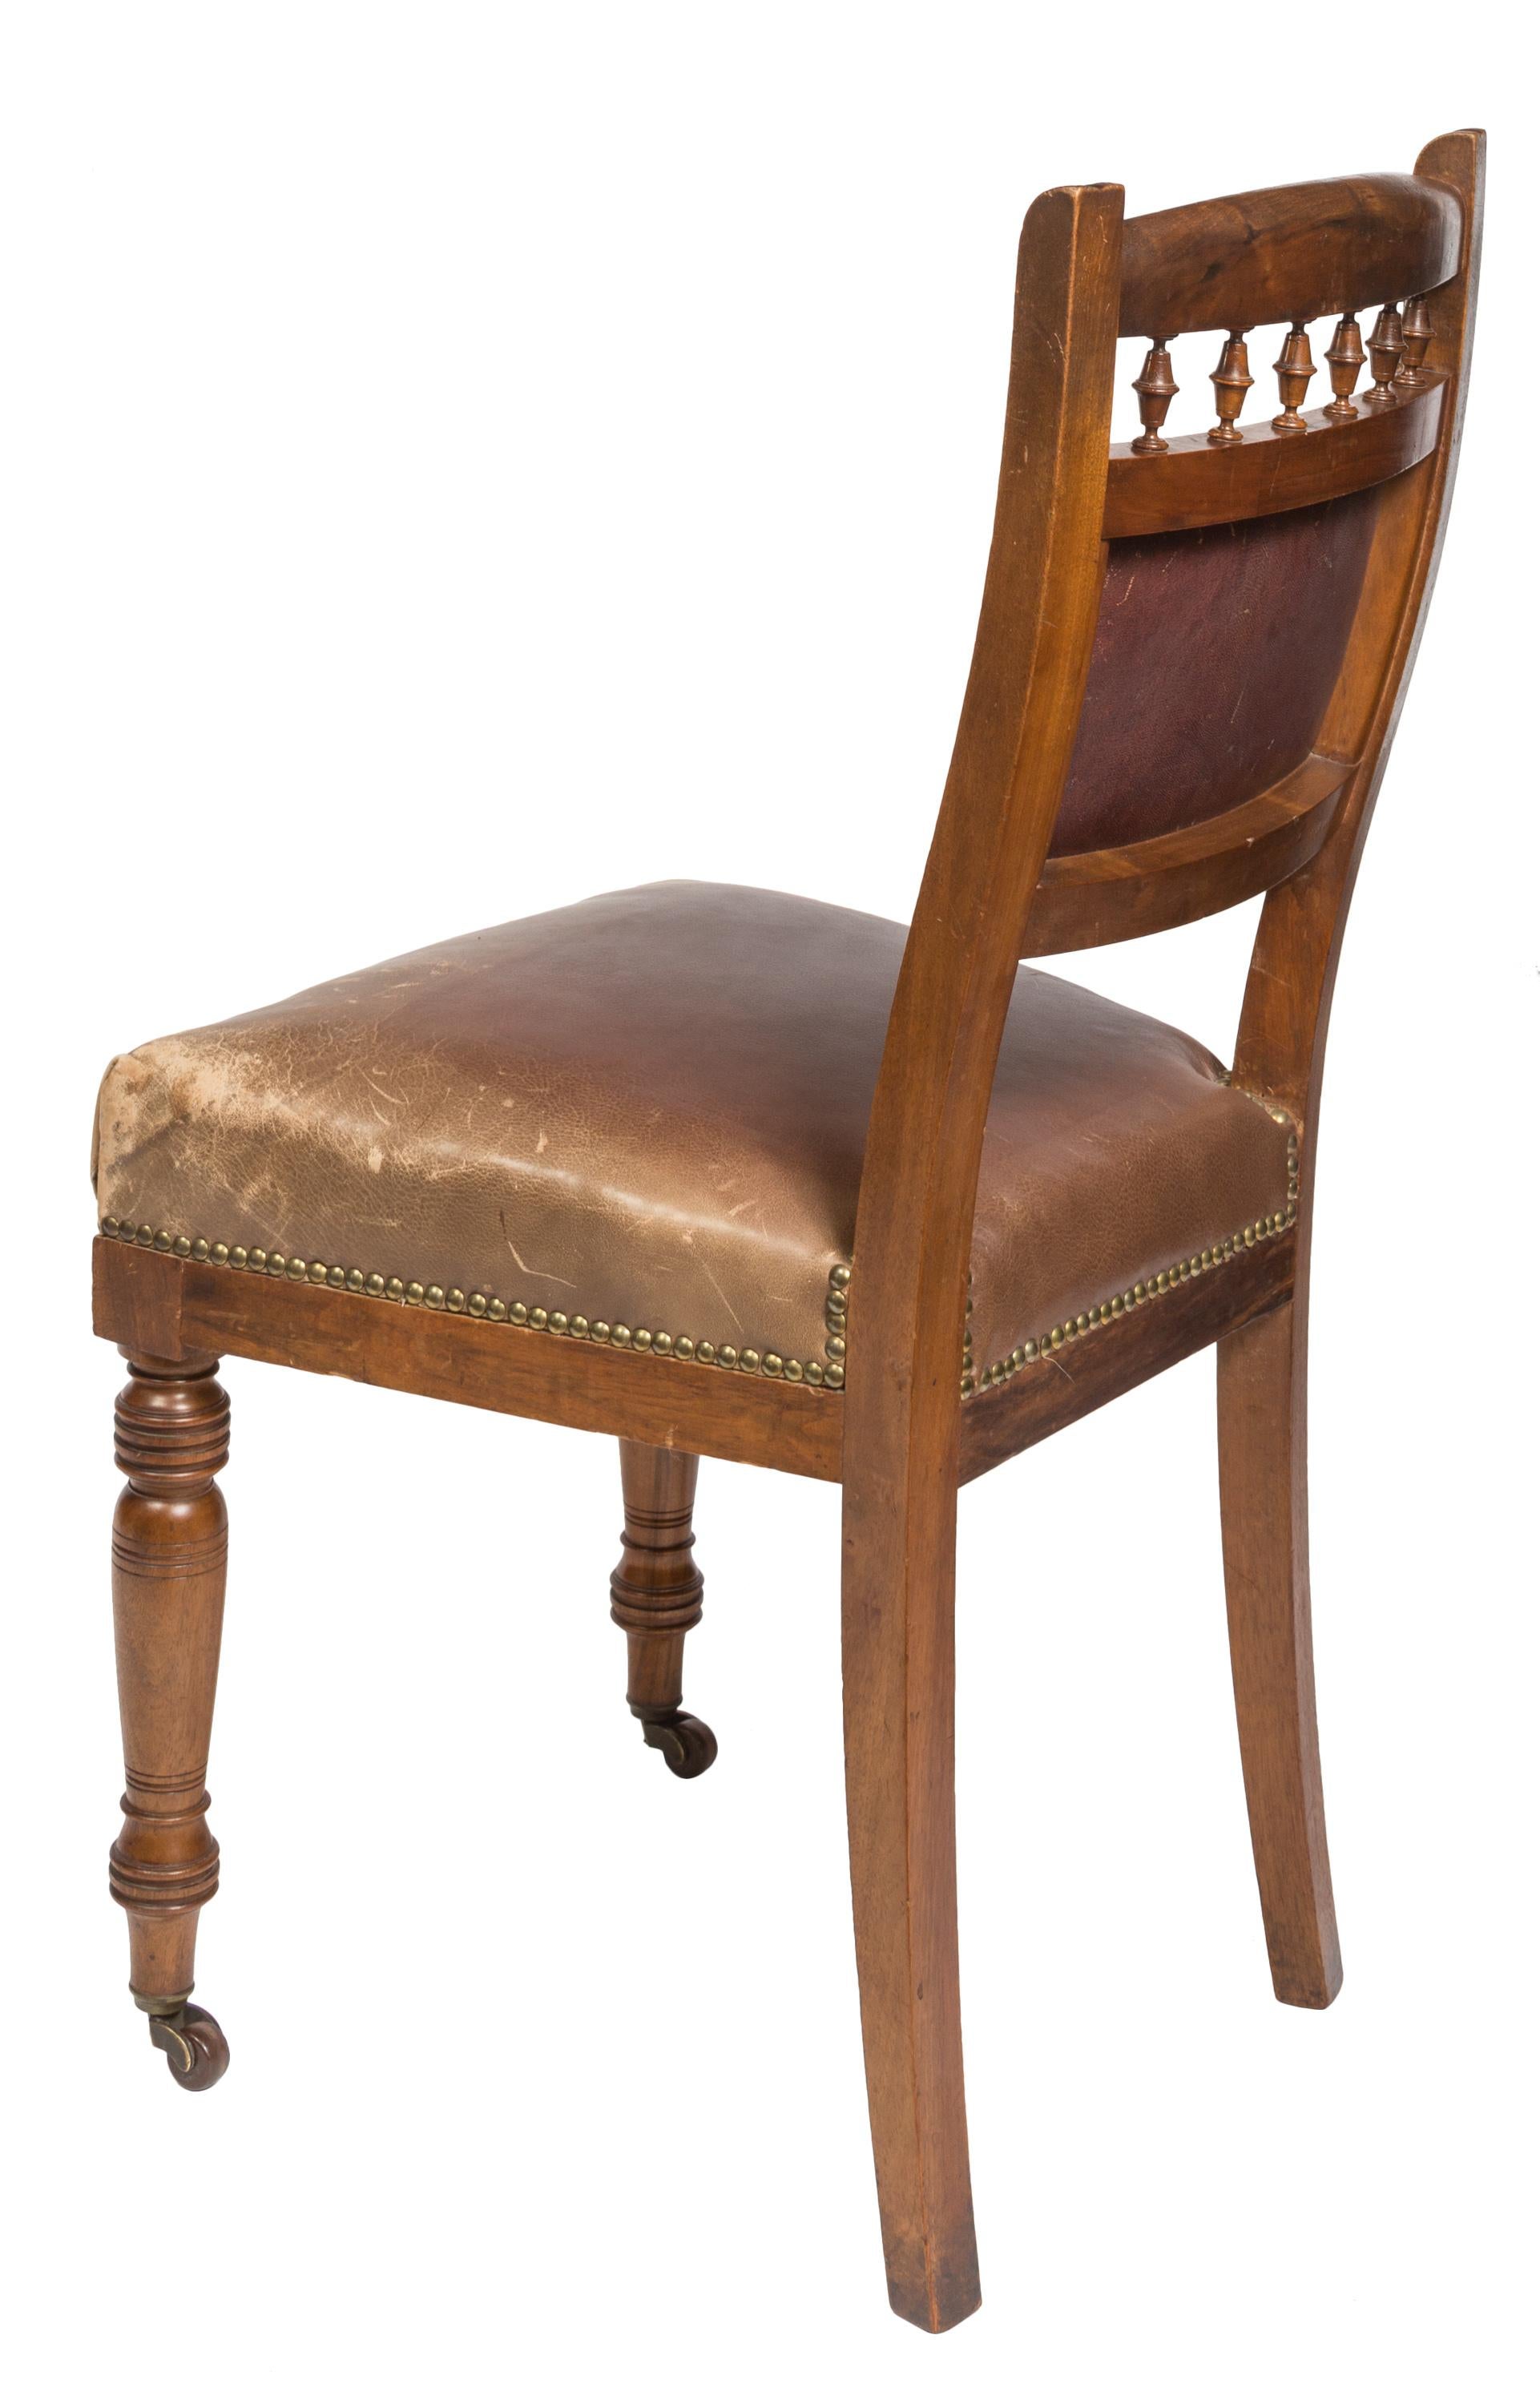 19th Century Matched Pair Victorian Style Chocolate Brown Leather Upholstered Dining Chairs For Sale